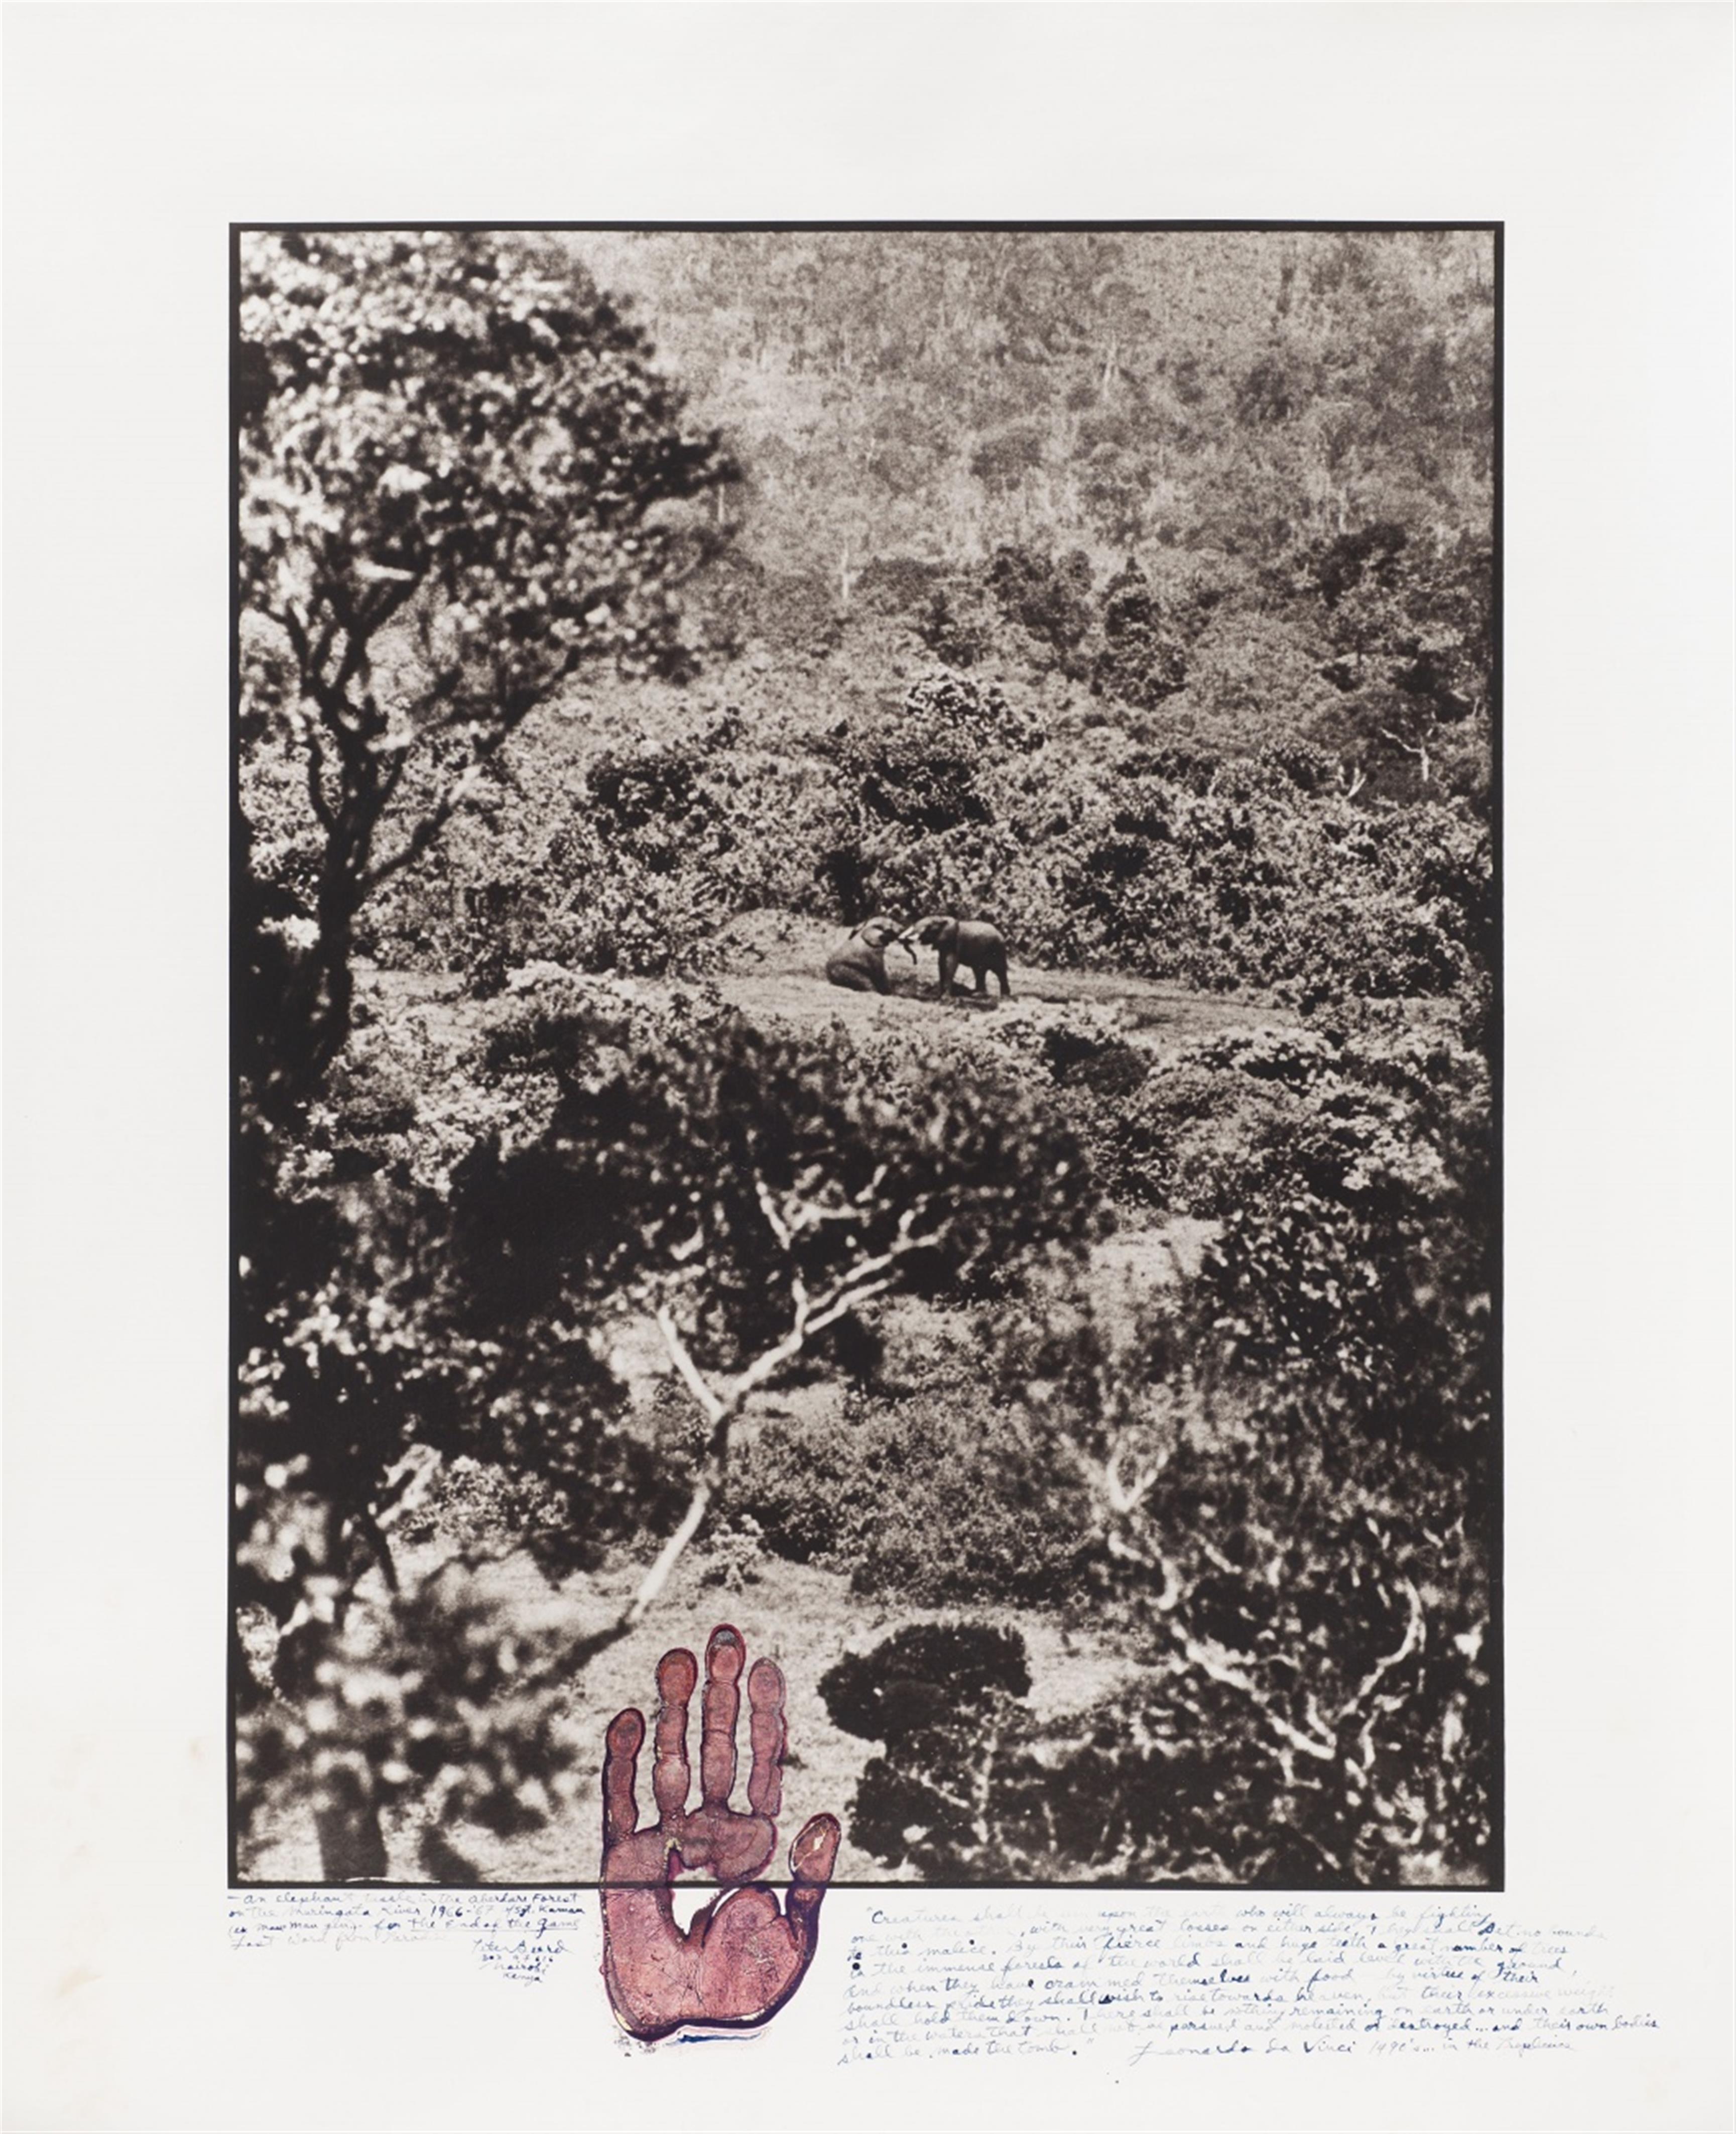 Peter Beard - Elephant tussle in the Aberdare Forest (from the series: The End of the Game/Last Word from Paradise) - image-1